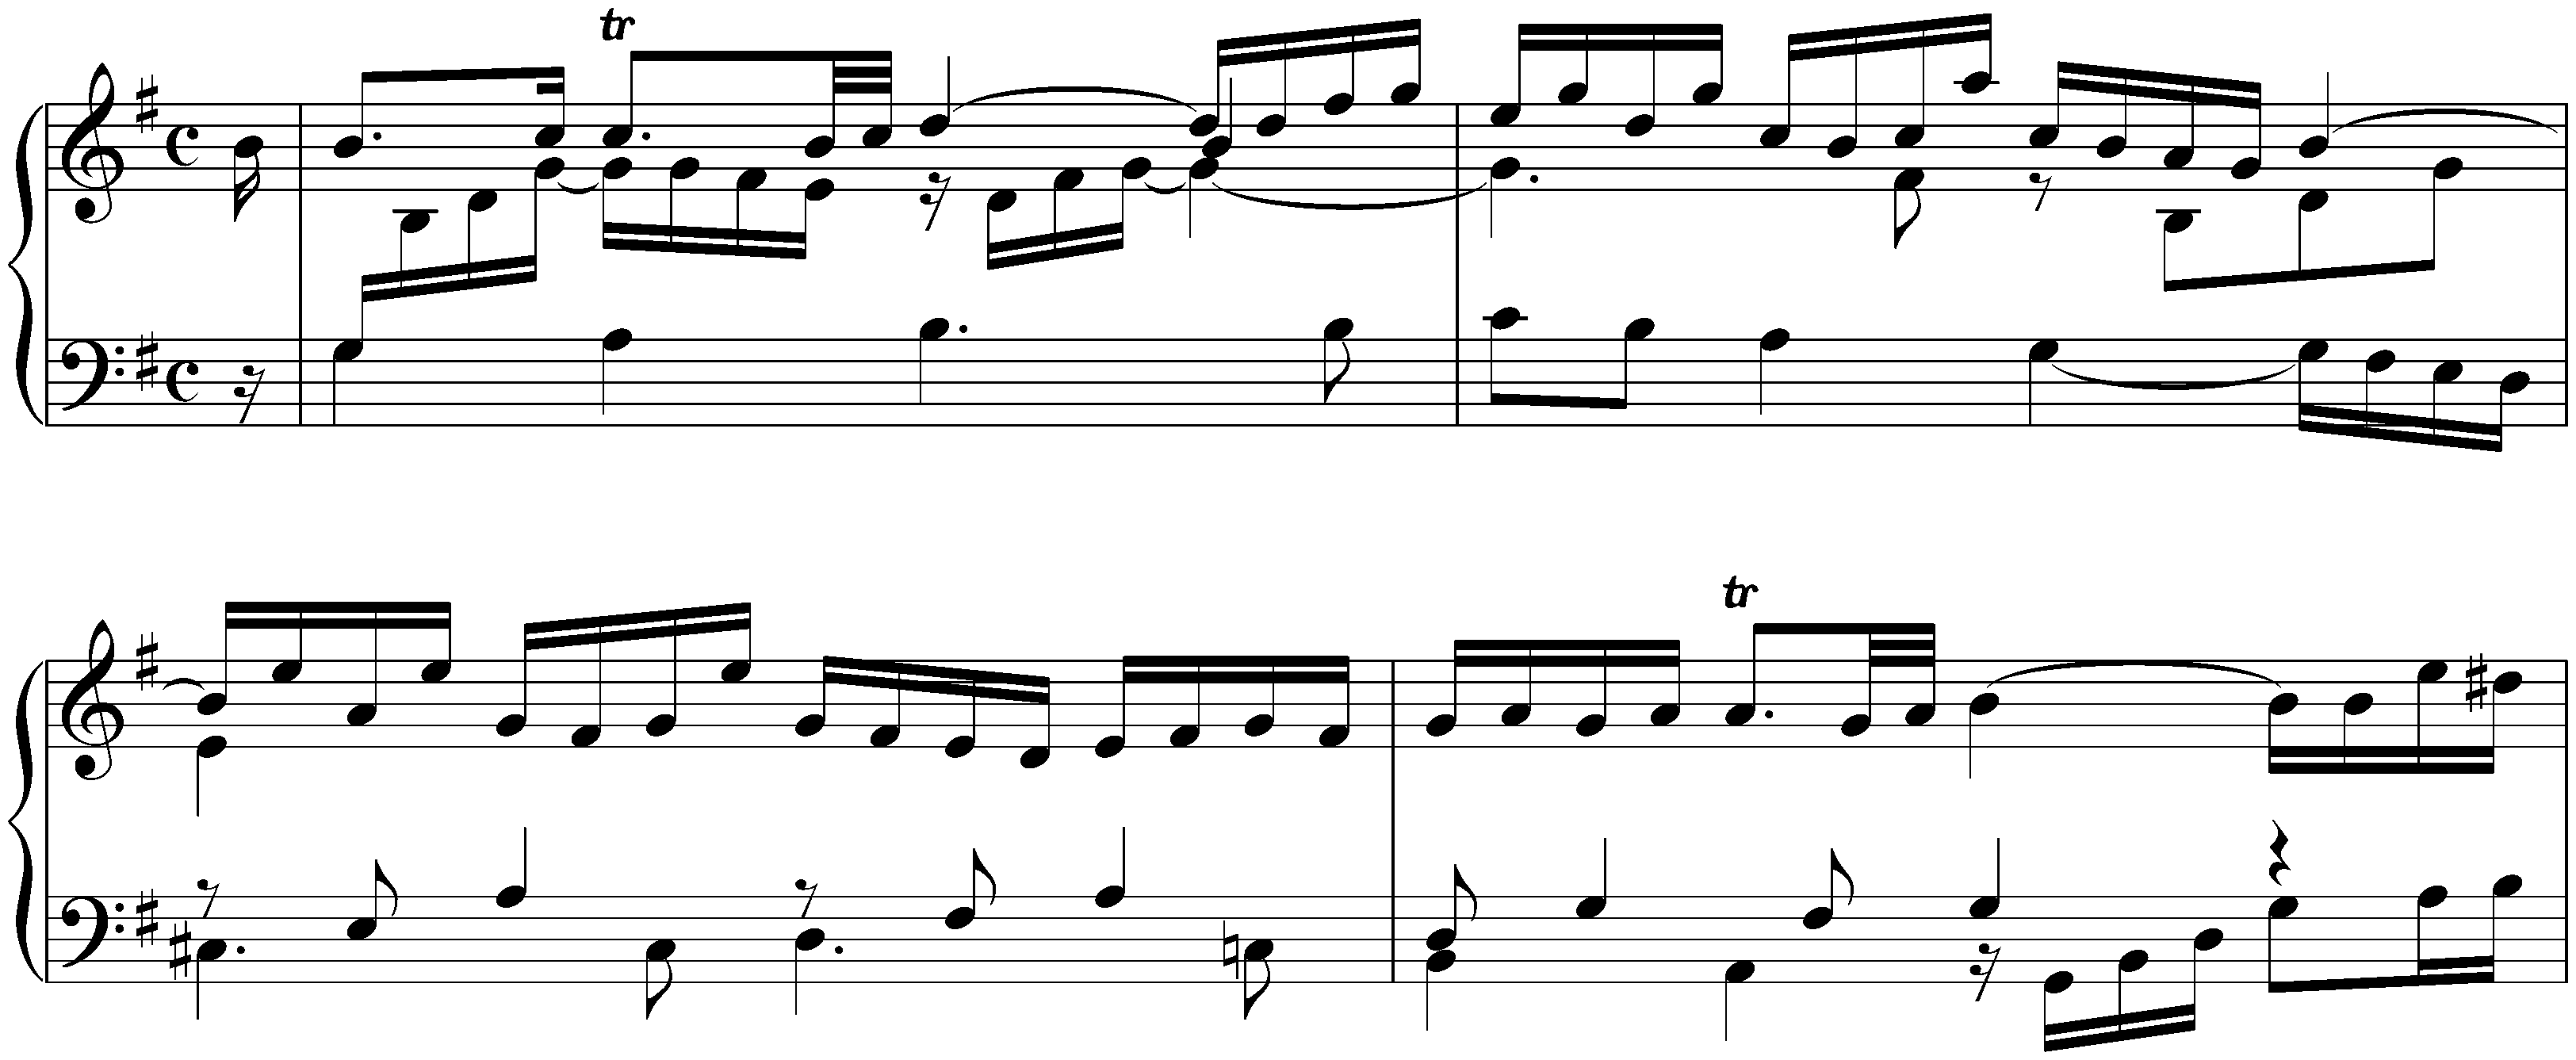 French Suite no. 5 in G major, BWV 816; 1. Allemande